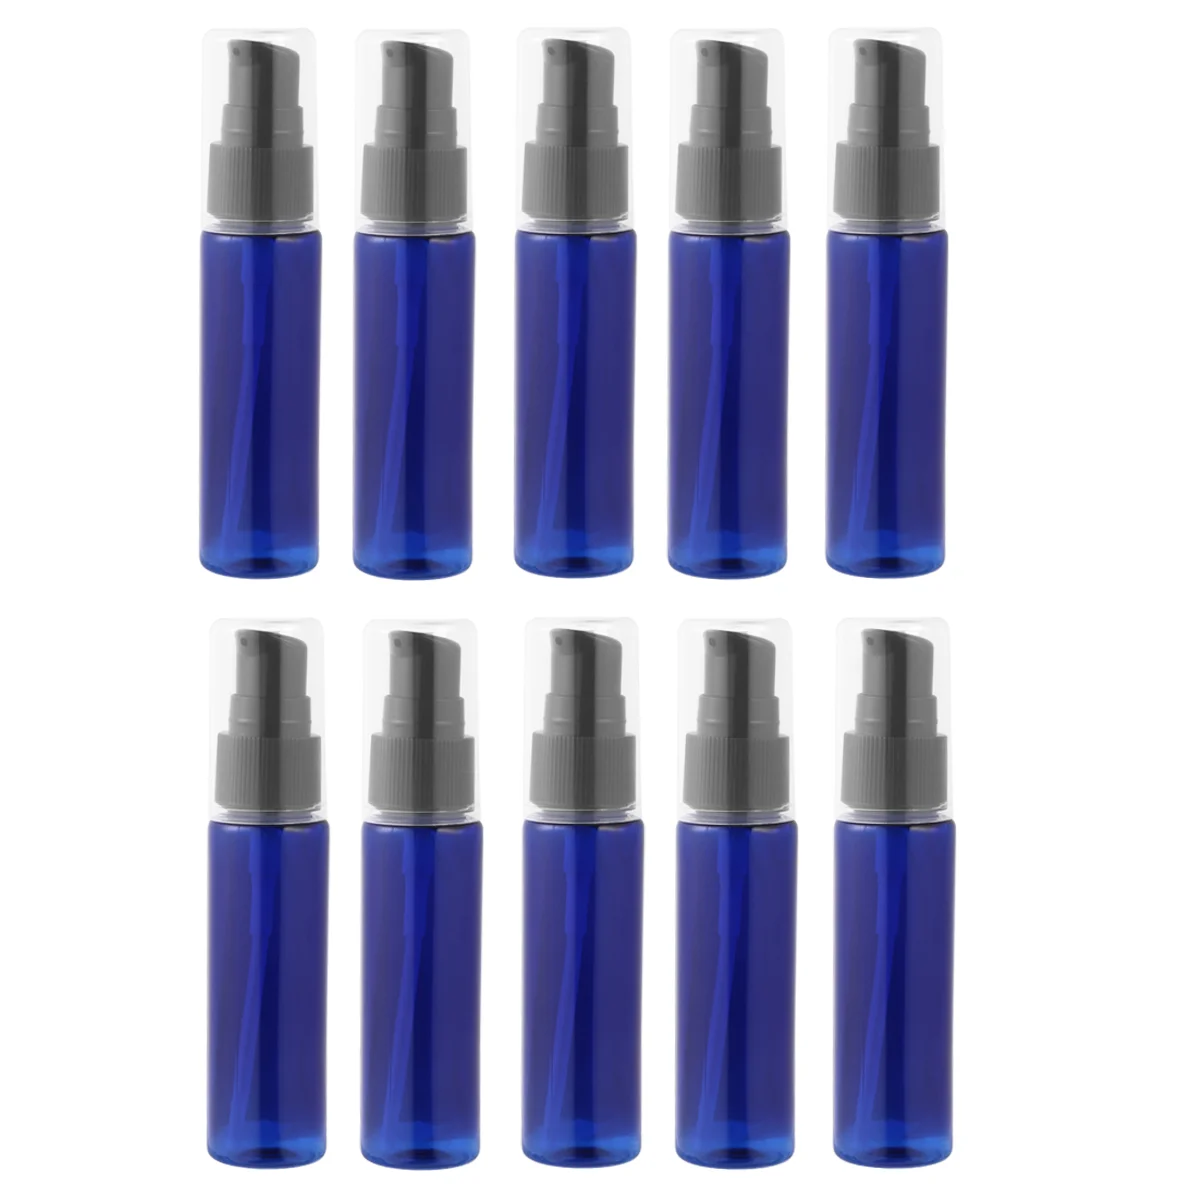 

10pcs Lotion Pump Travel Bottle Empty Refill Spray Containers Dispenser For Essential Oils Lotion Foundation Shampoo 30ml (